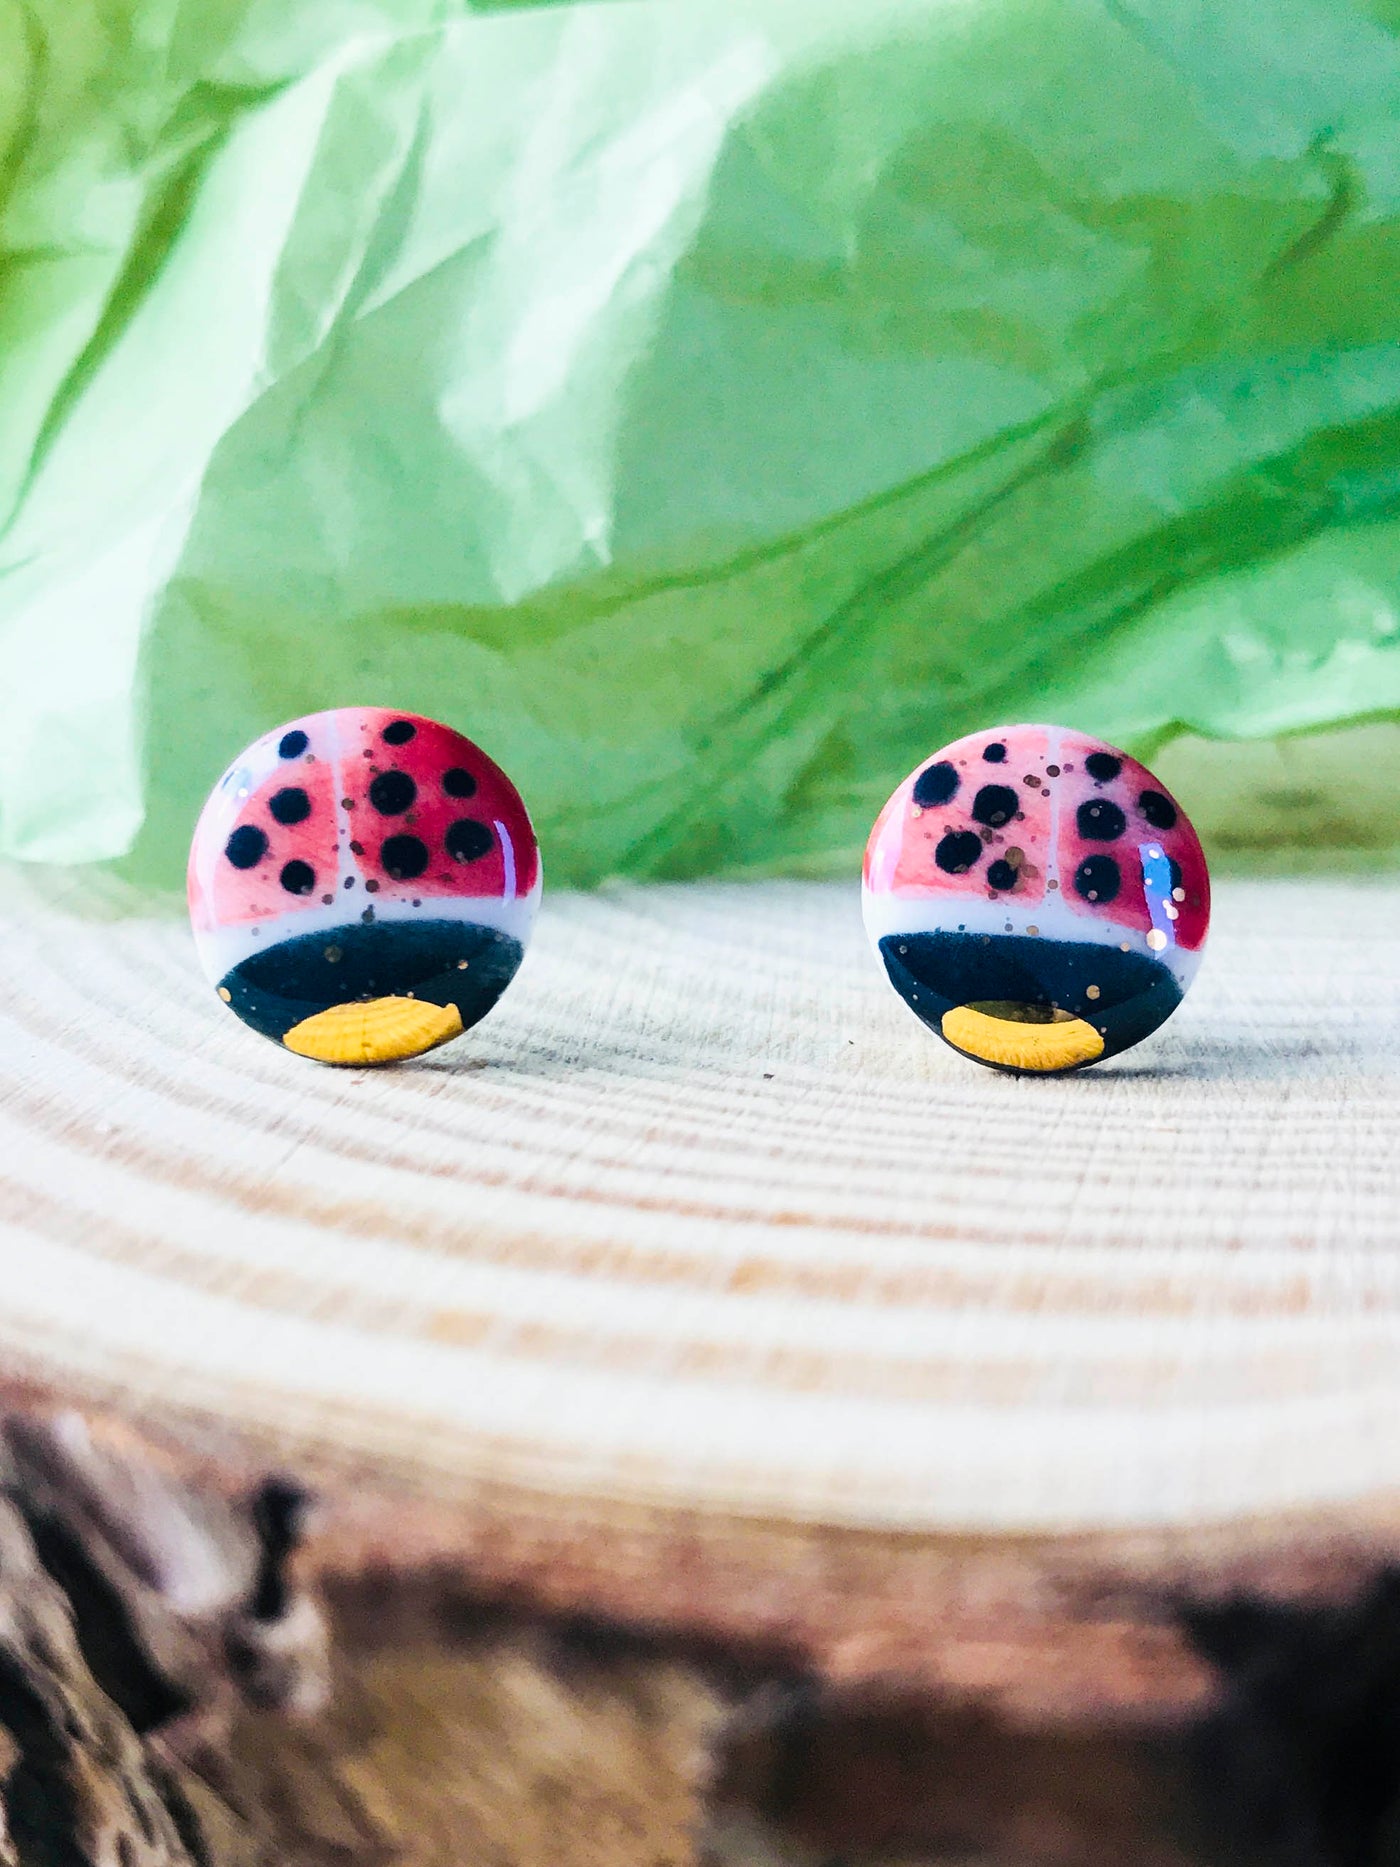 Joined by Fire - Small ceramic earrings